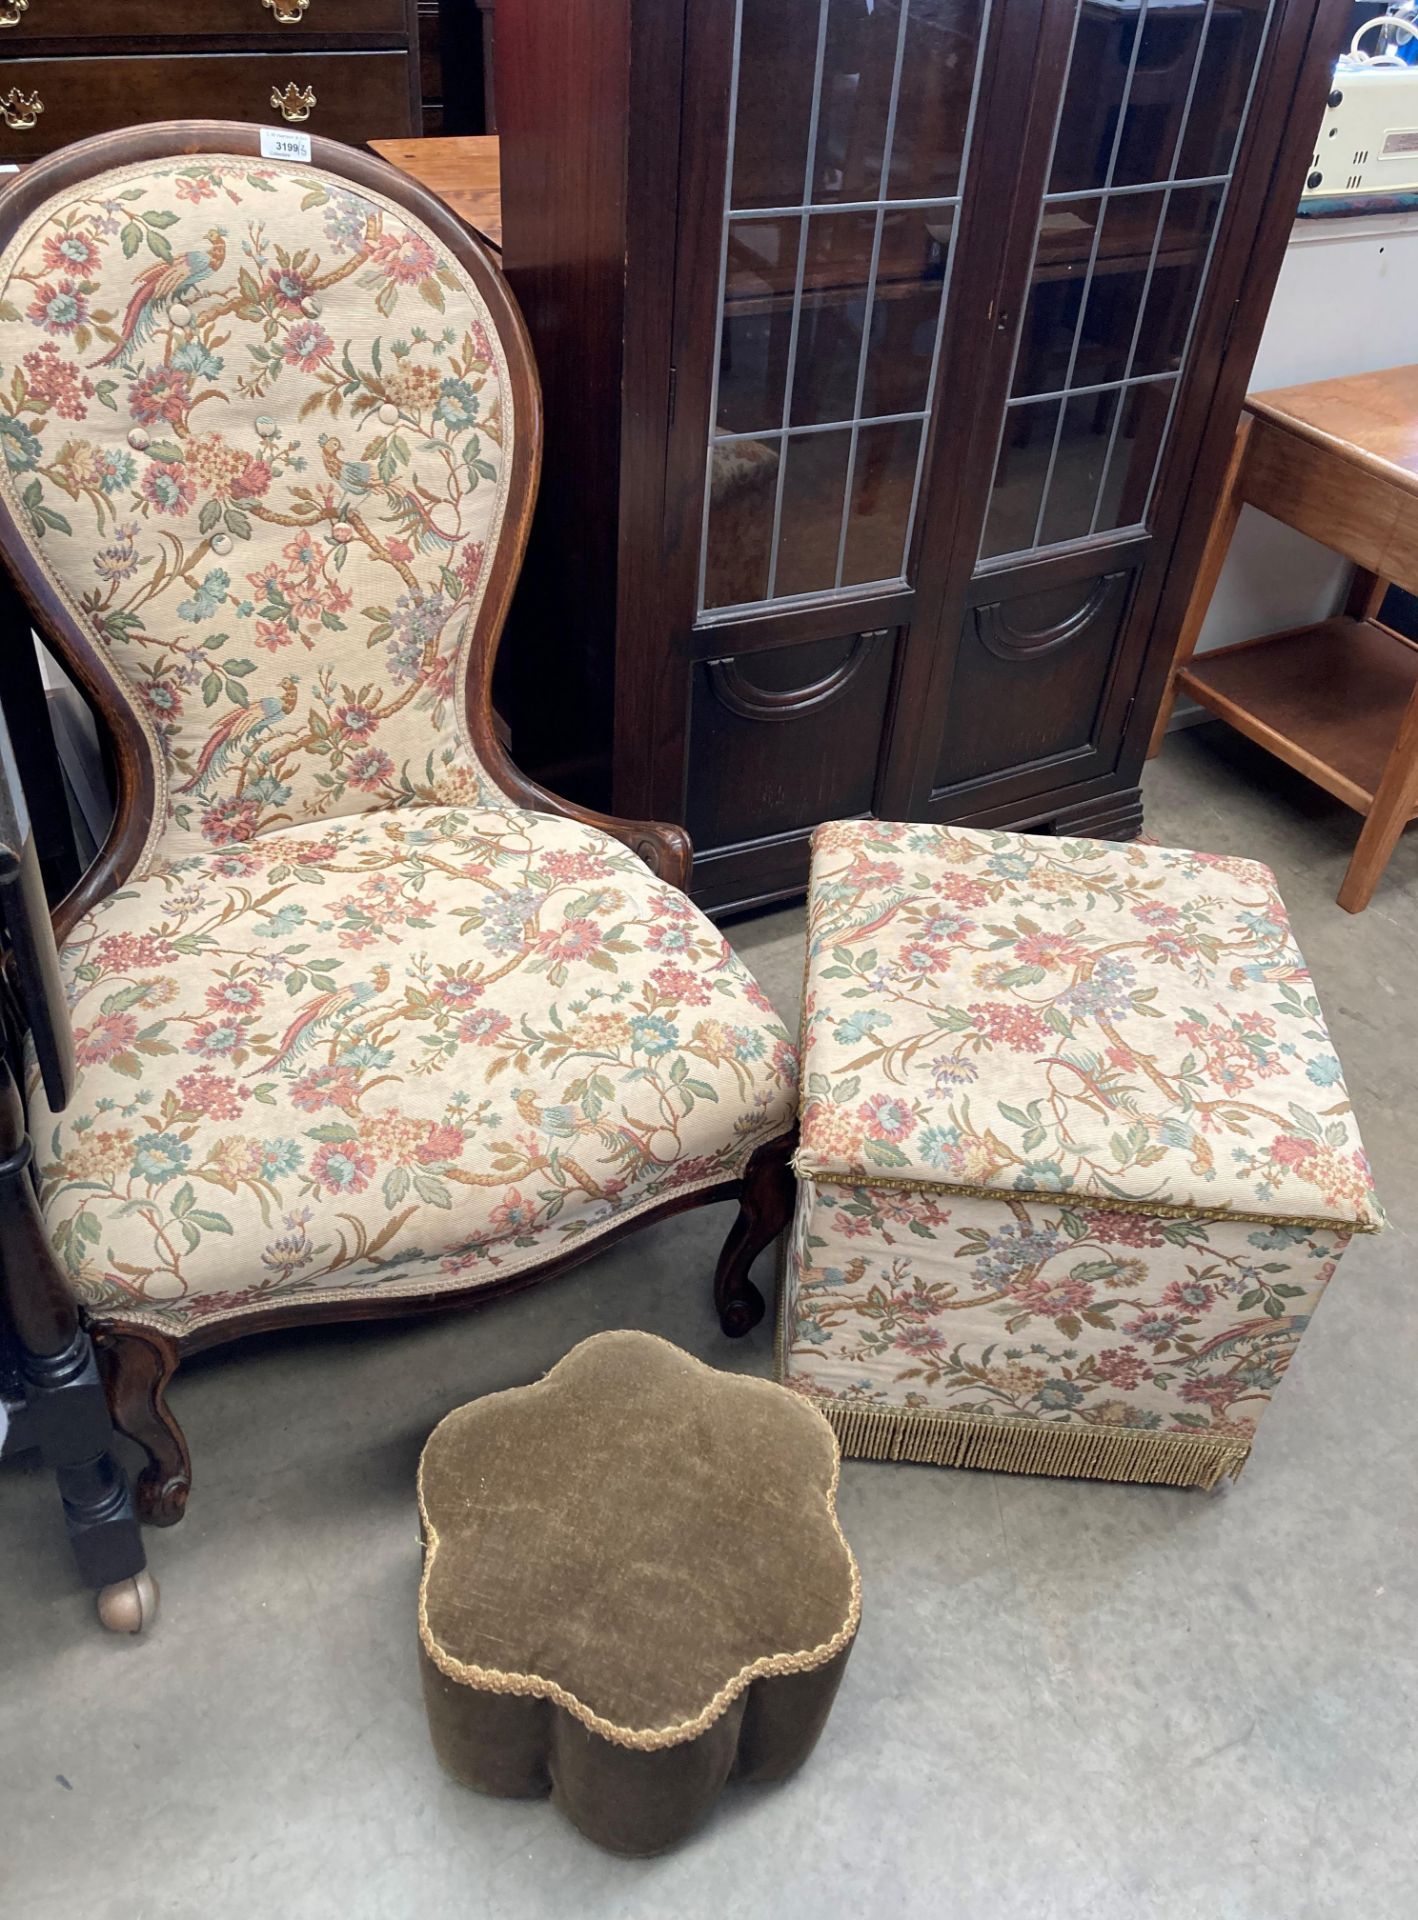 A stained mahogany balloon back nursing chair with yellow floral and bird patterned upholstery - Image 2 of 2